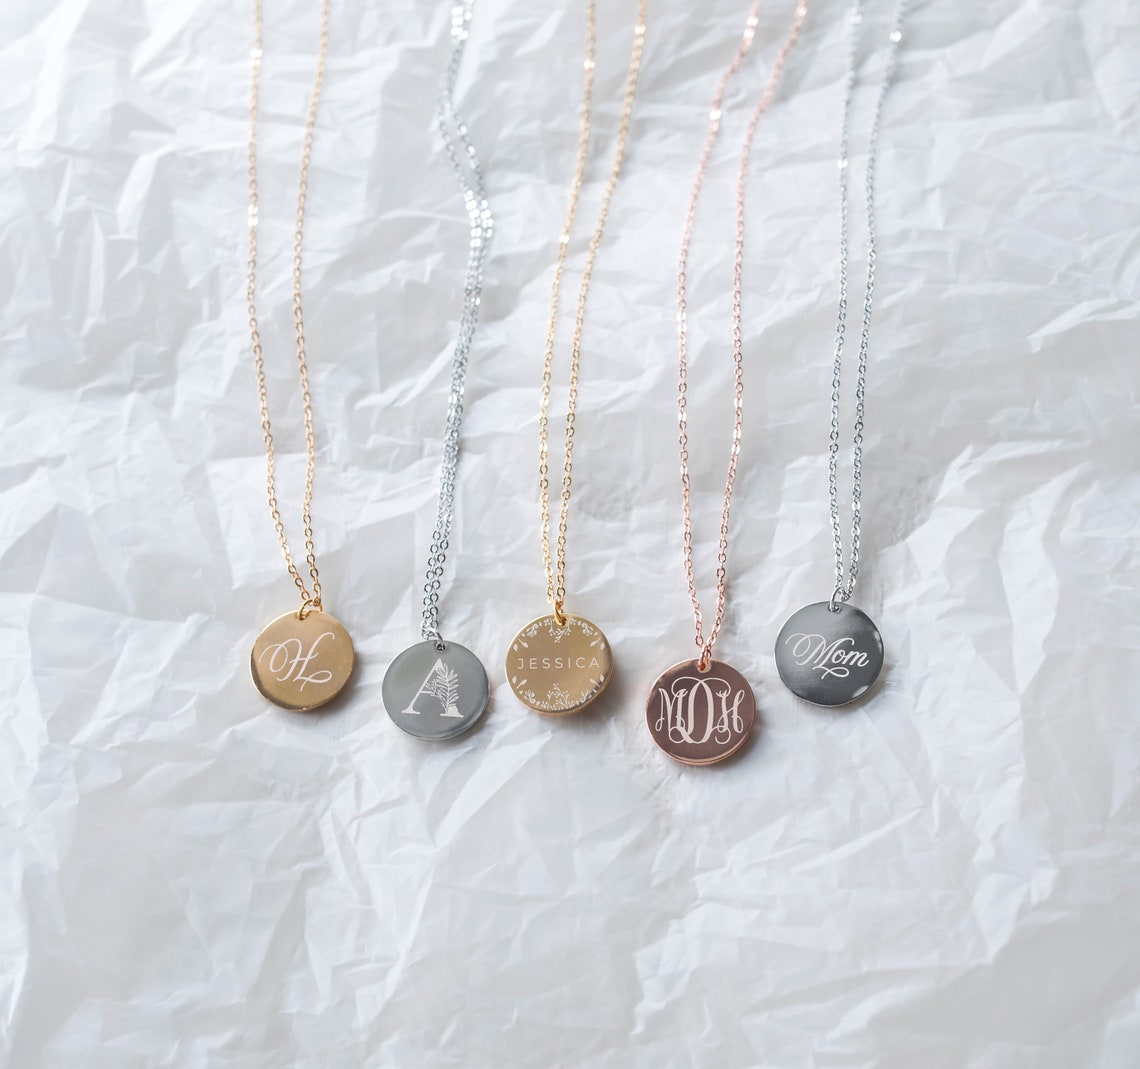 Engraved personalized initial necklace